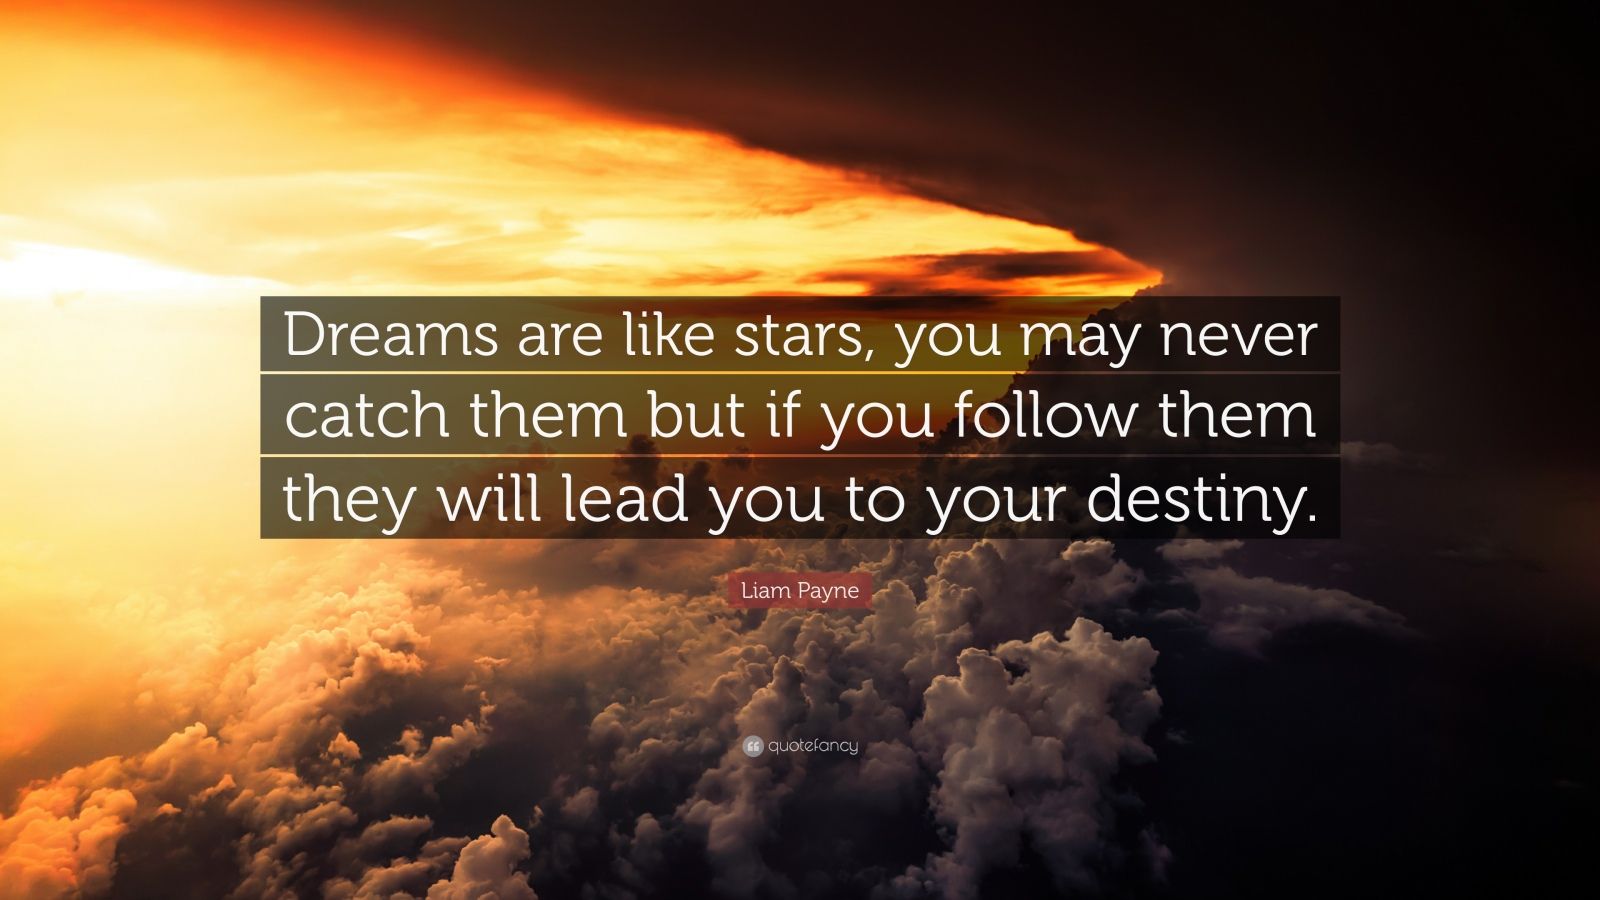 Liam Payne Quote: “Dreams are like stars, you may never catch them but